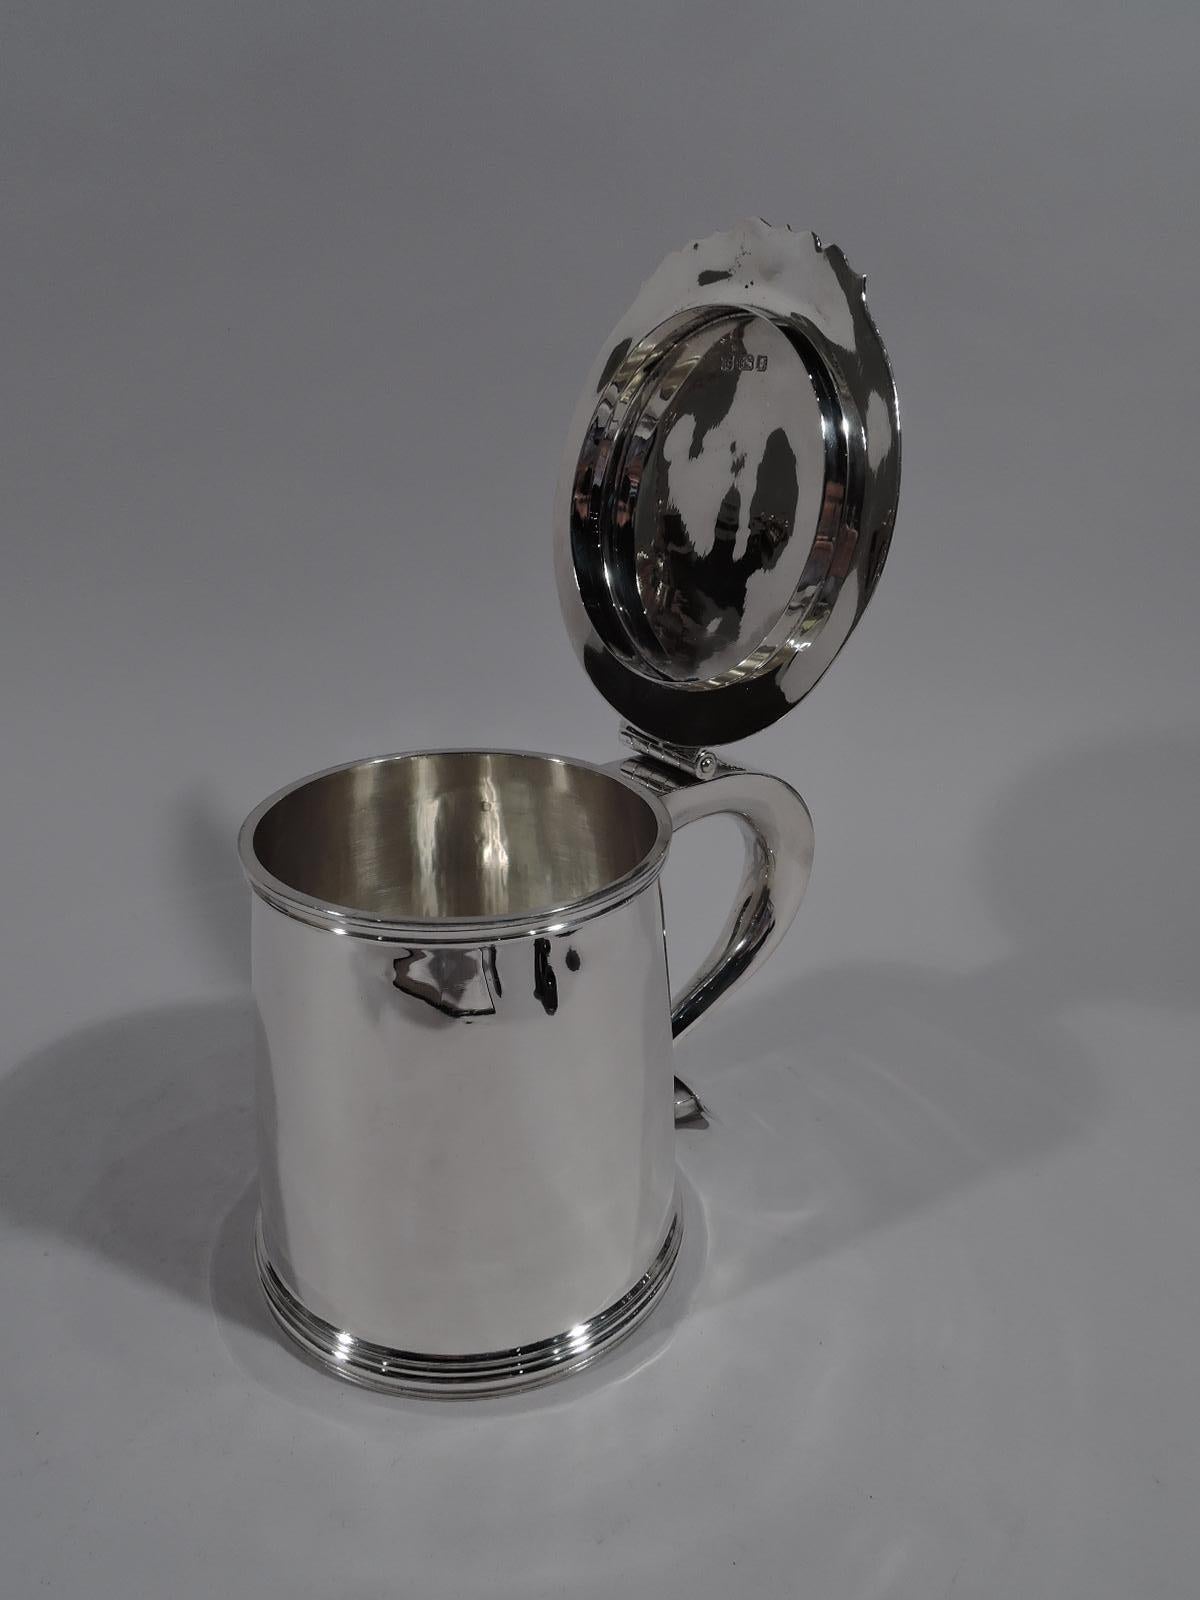 Georgian Tiffany English Sterling Silver Tankard for Olden-Days Toping